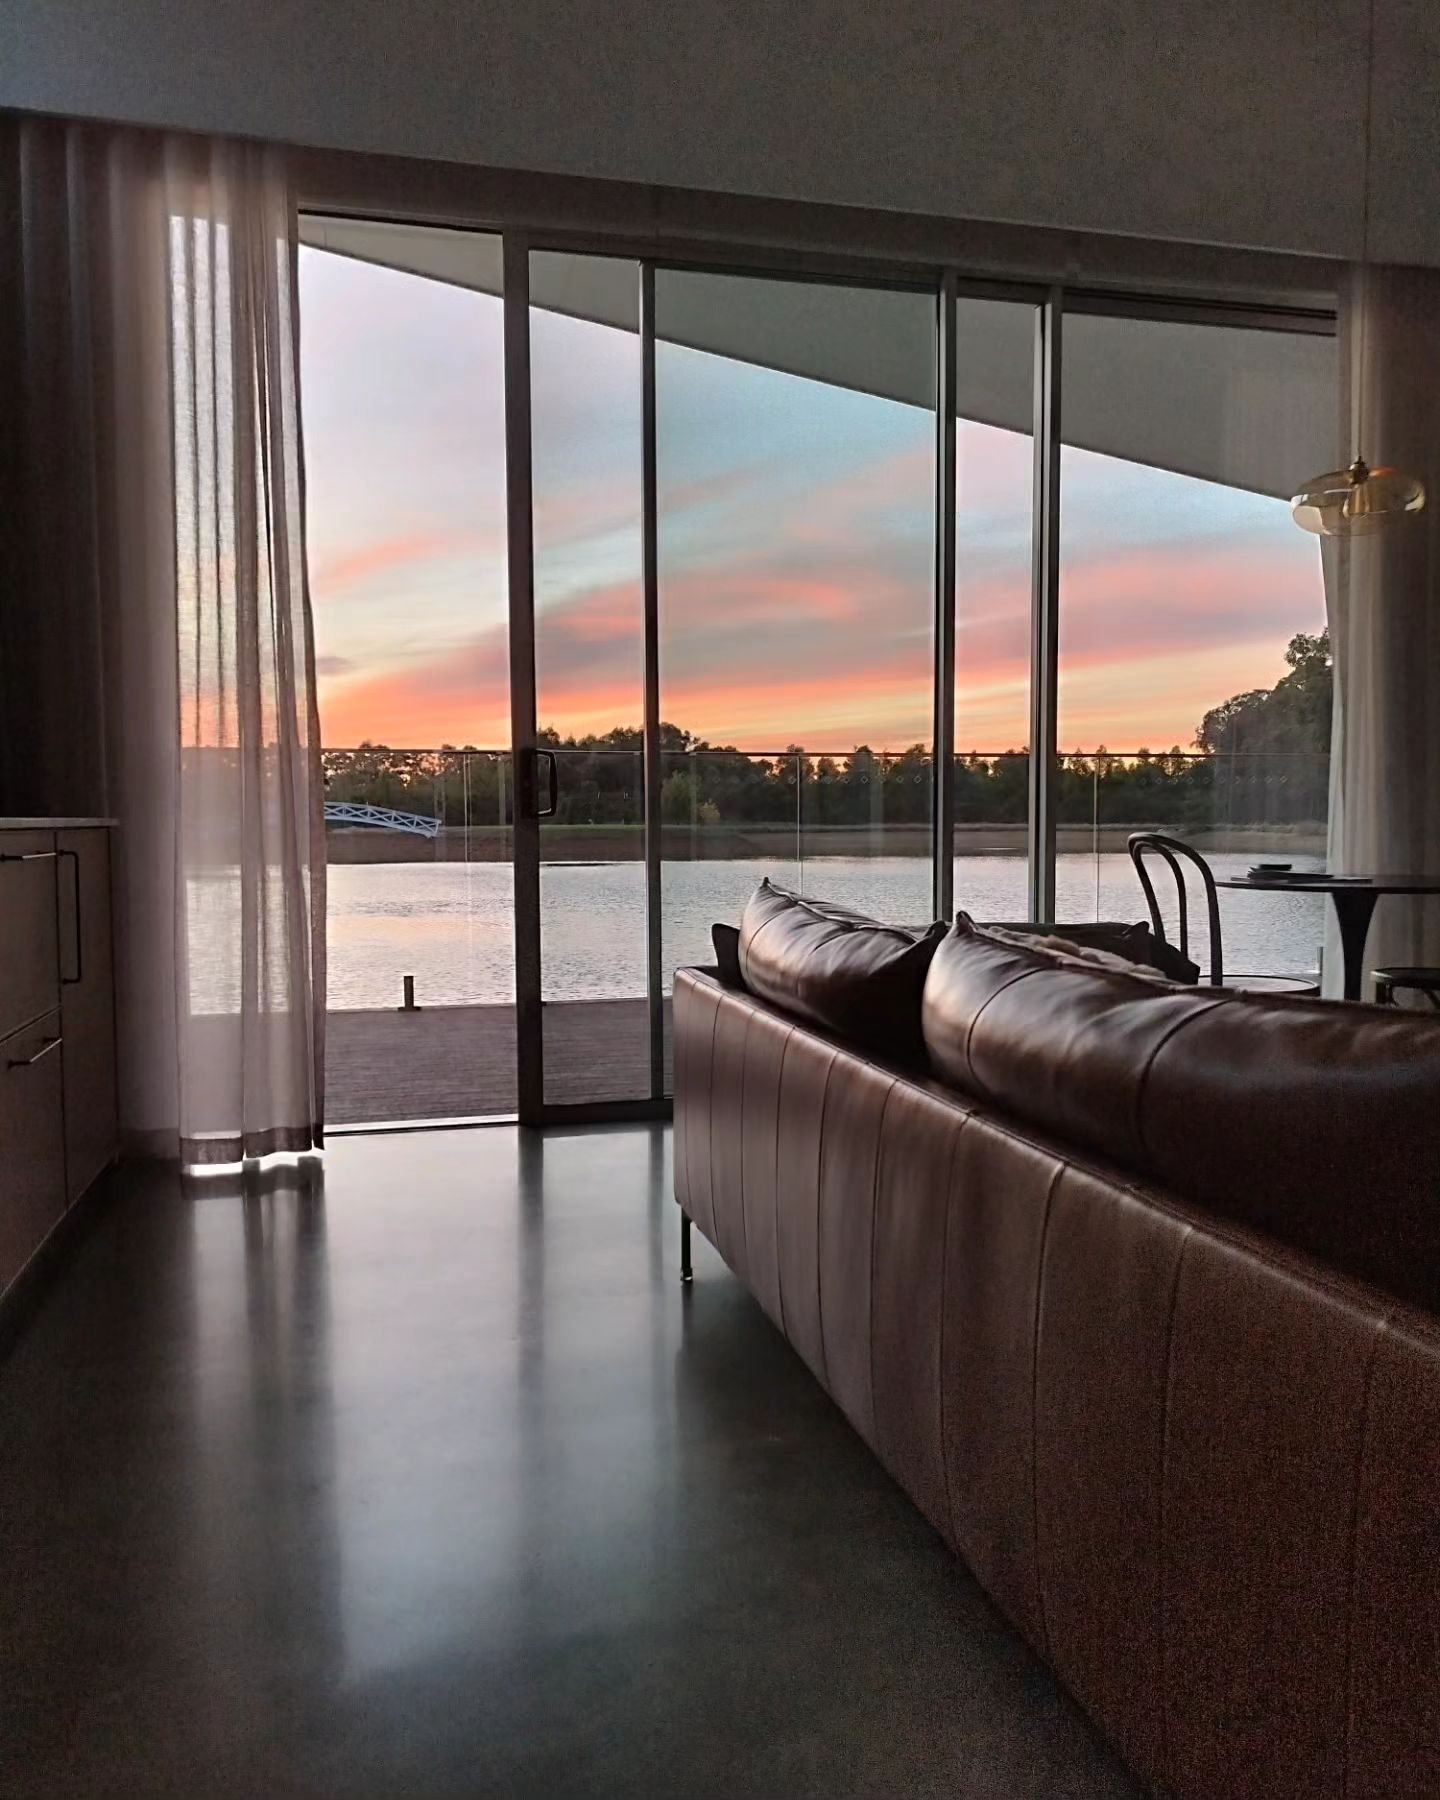 Romantic sunrise views from your king bed, balcony, breakfast table or even from your bath. It's not just a stay, it's a complete experience at Edge Luxury Villas. Designed for views, luxury and romance, it's your next perfect getaway. 
Who are you b